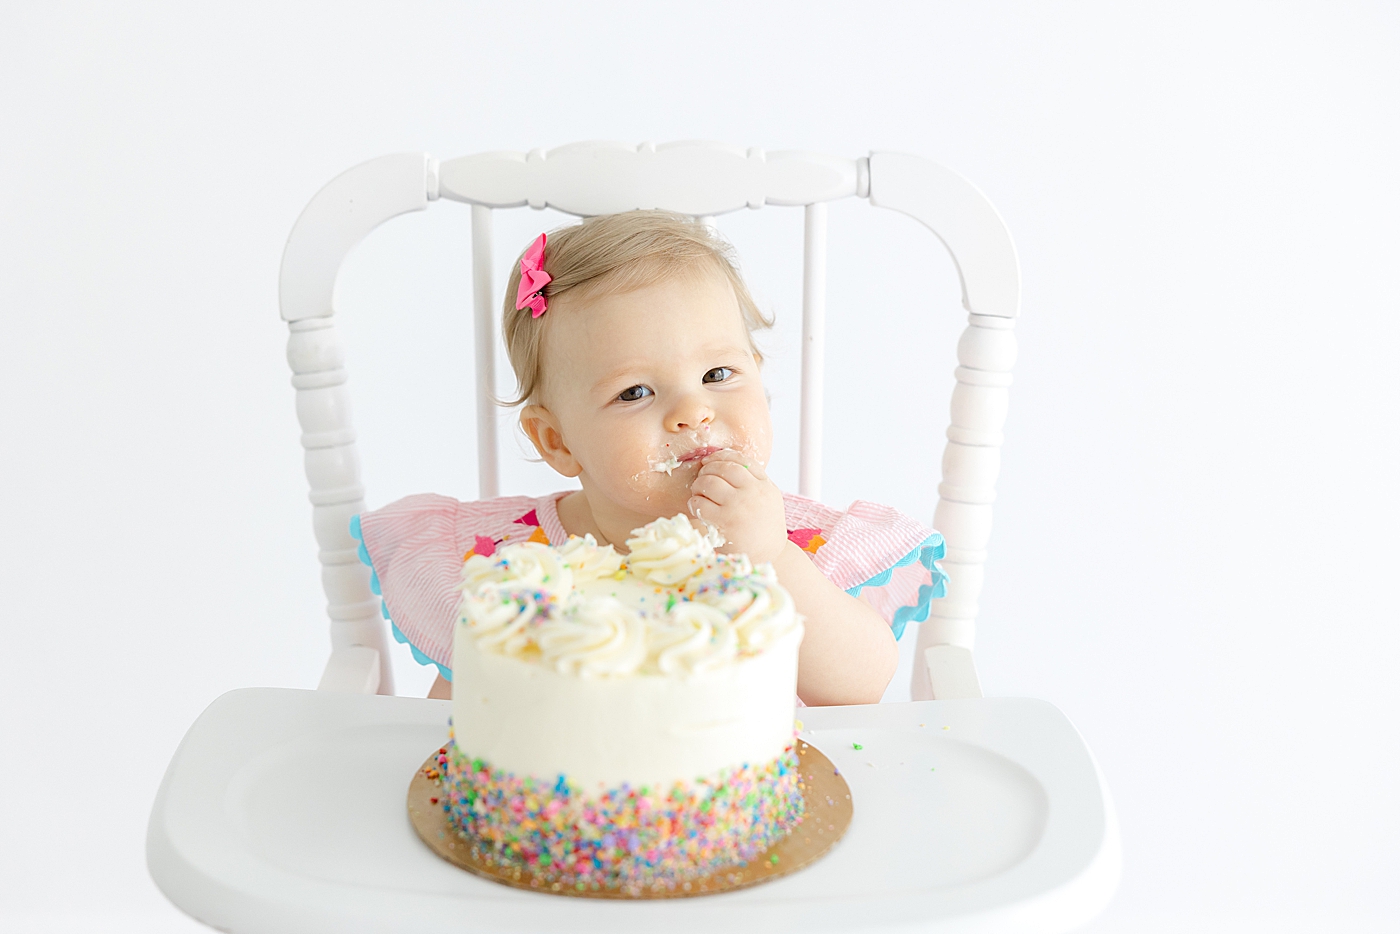 Baby girl sitting in a highchair eating a cake | Image by Sana Ahmed